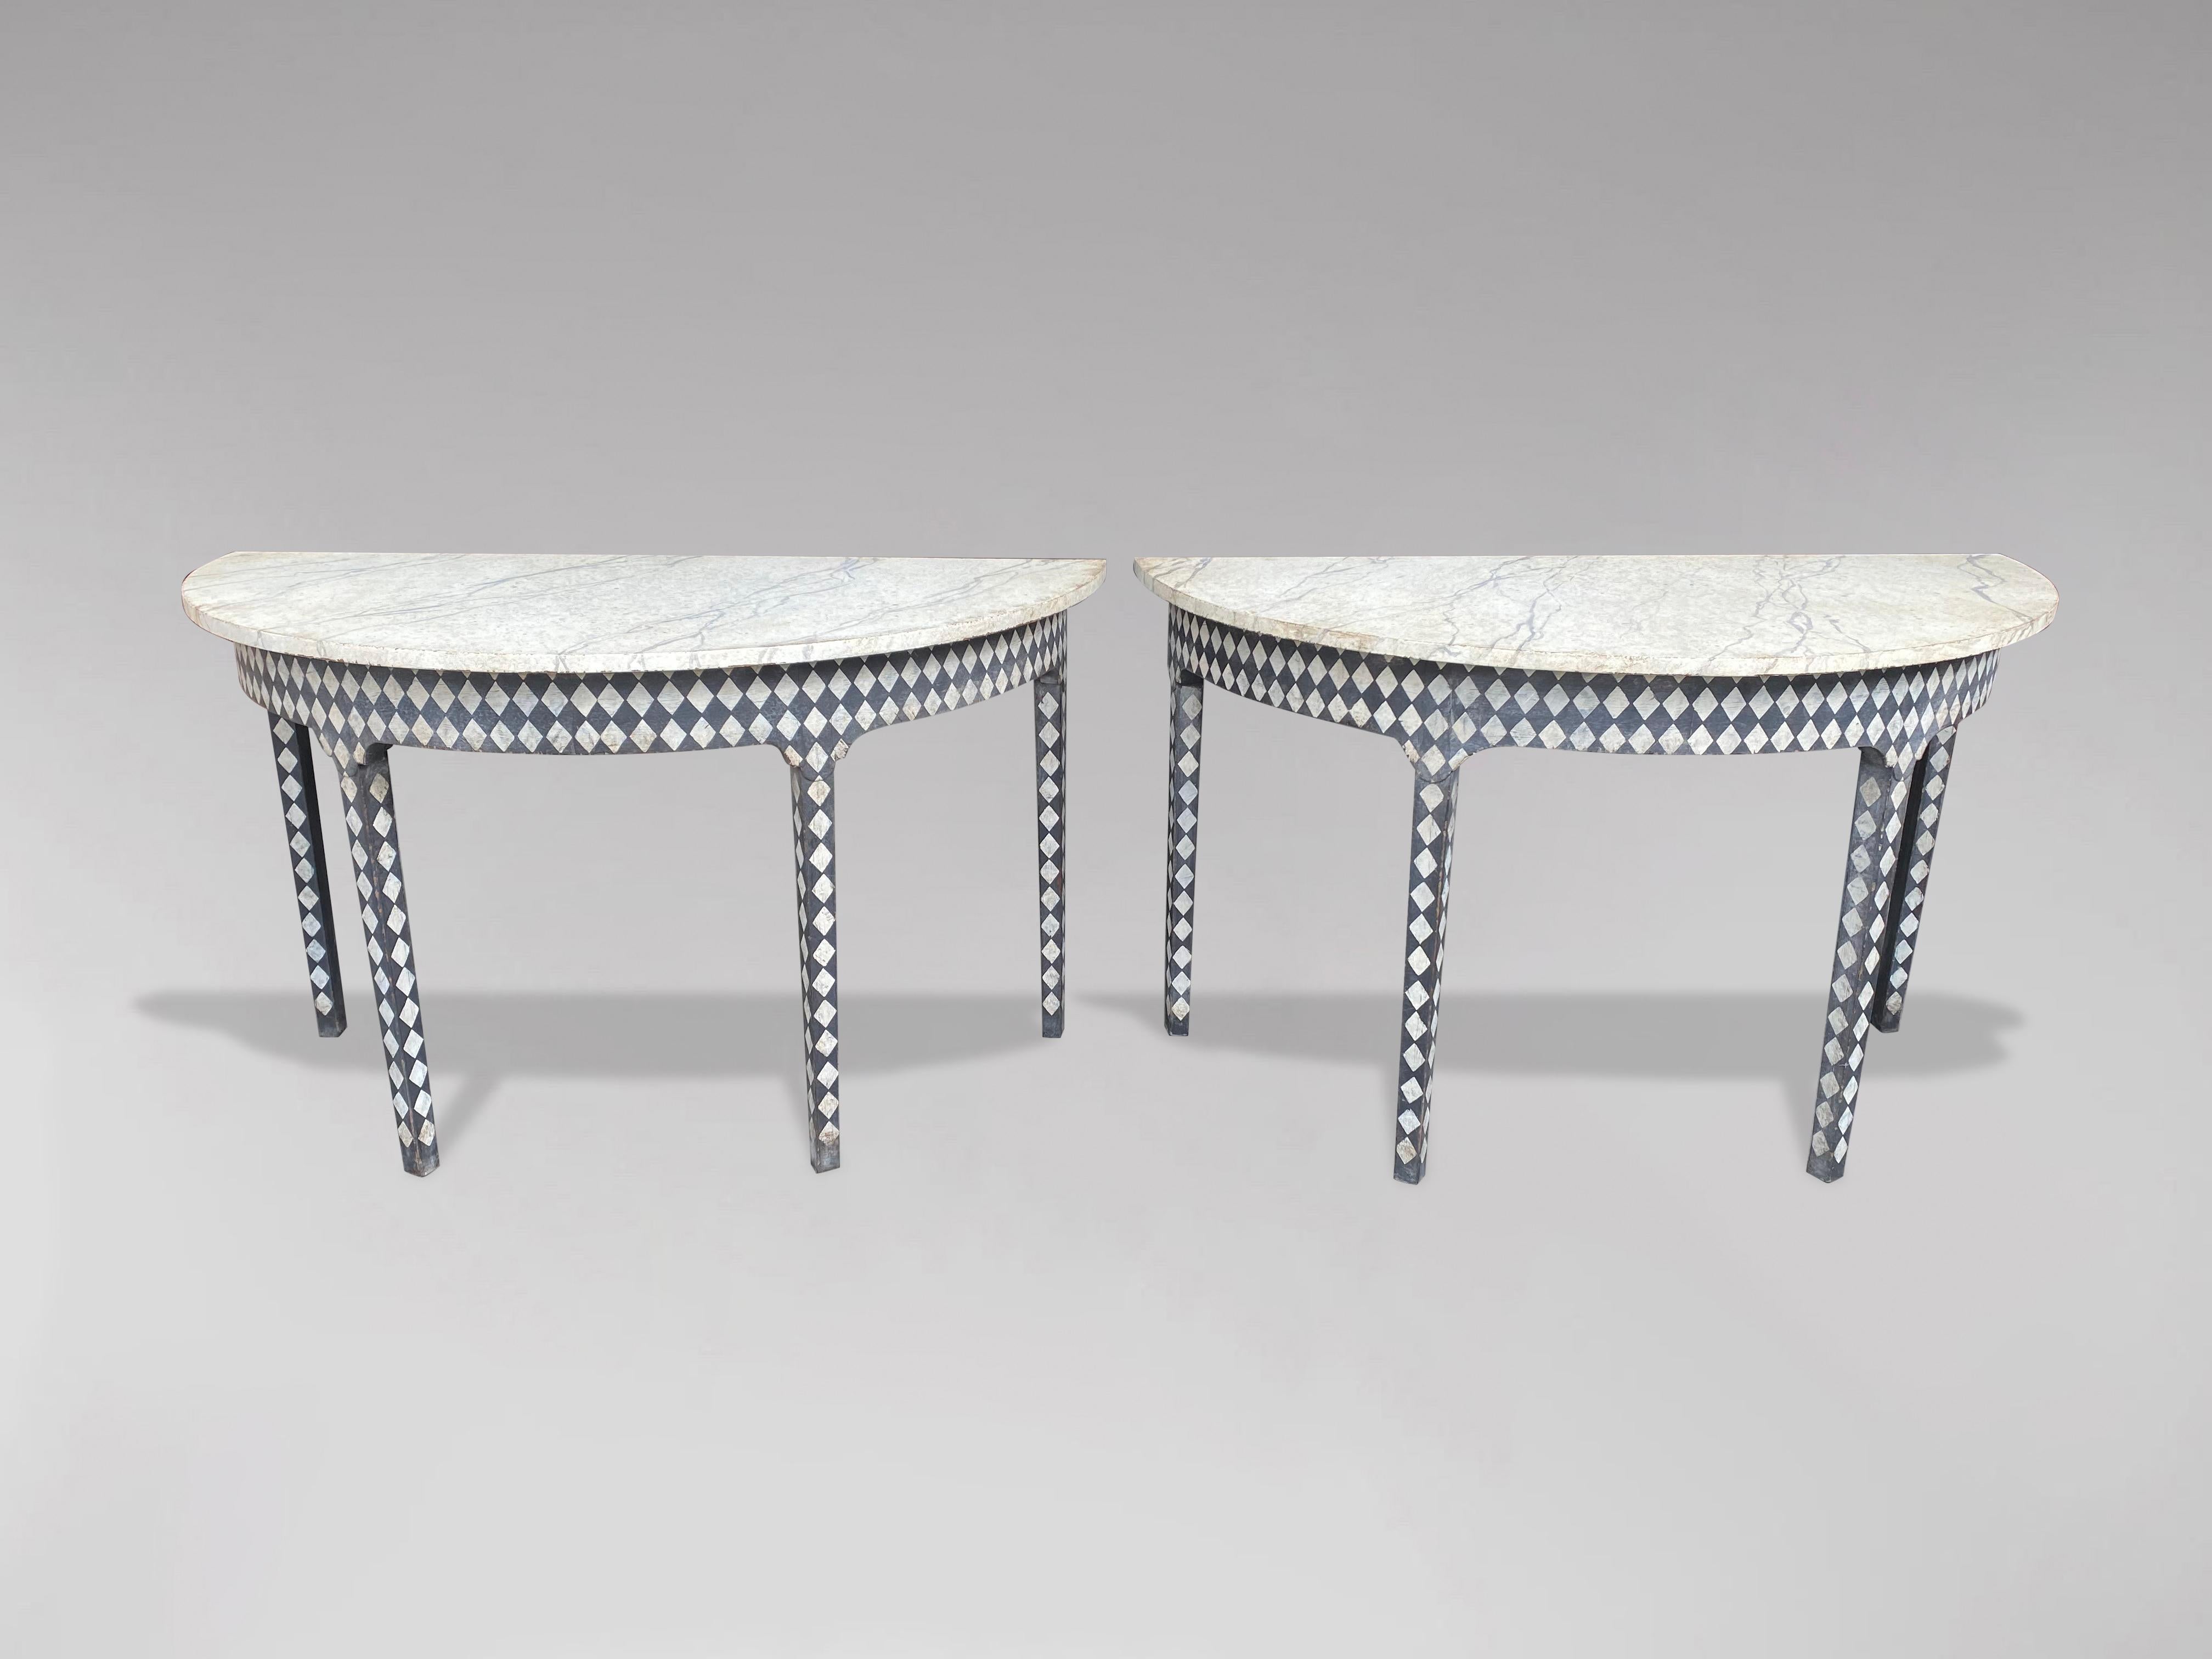 A charming pair of early 19th century demi-lune console tables. English in origin and dating to the late Georgian period. Now painted in a geometric design with faux marble tops. Each table stands on 4 tapered legs. Fabulous used either as a pair or